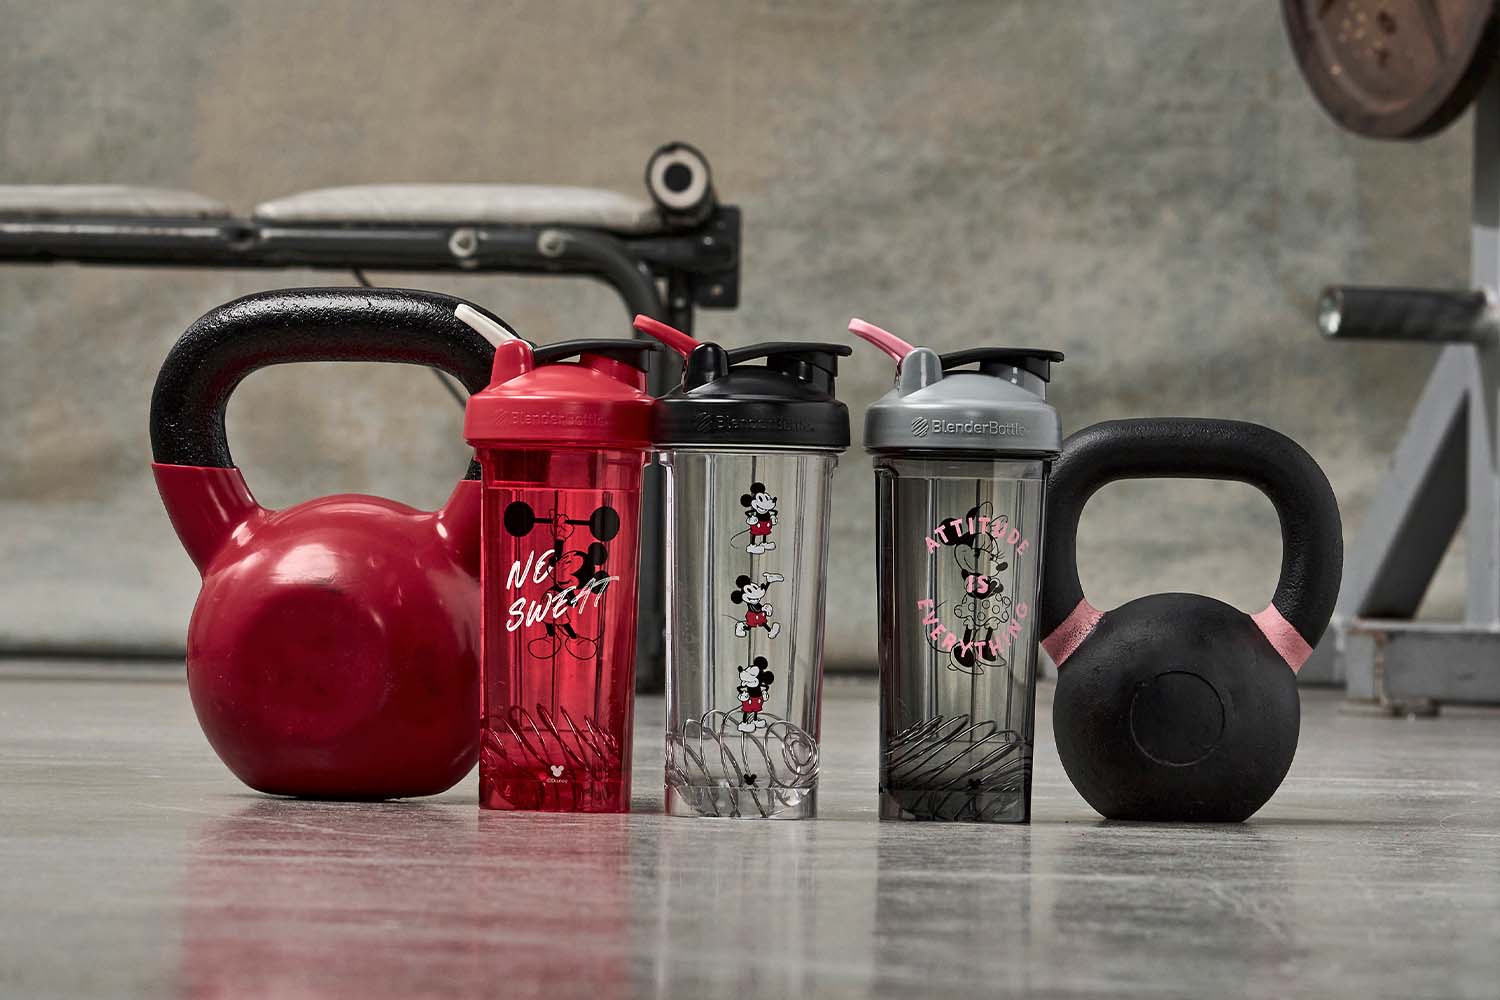 Mickey Mouse shaker bottles and a Minnie Mouse shaker cup sitting on the gym floor